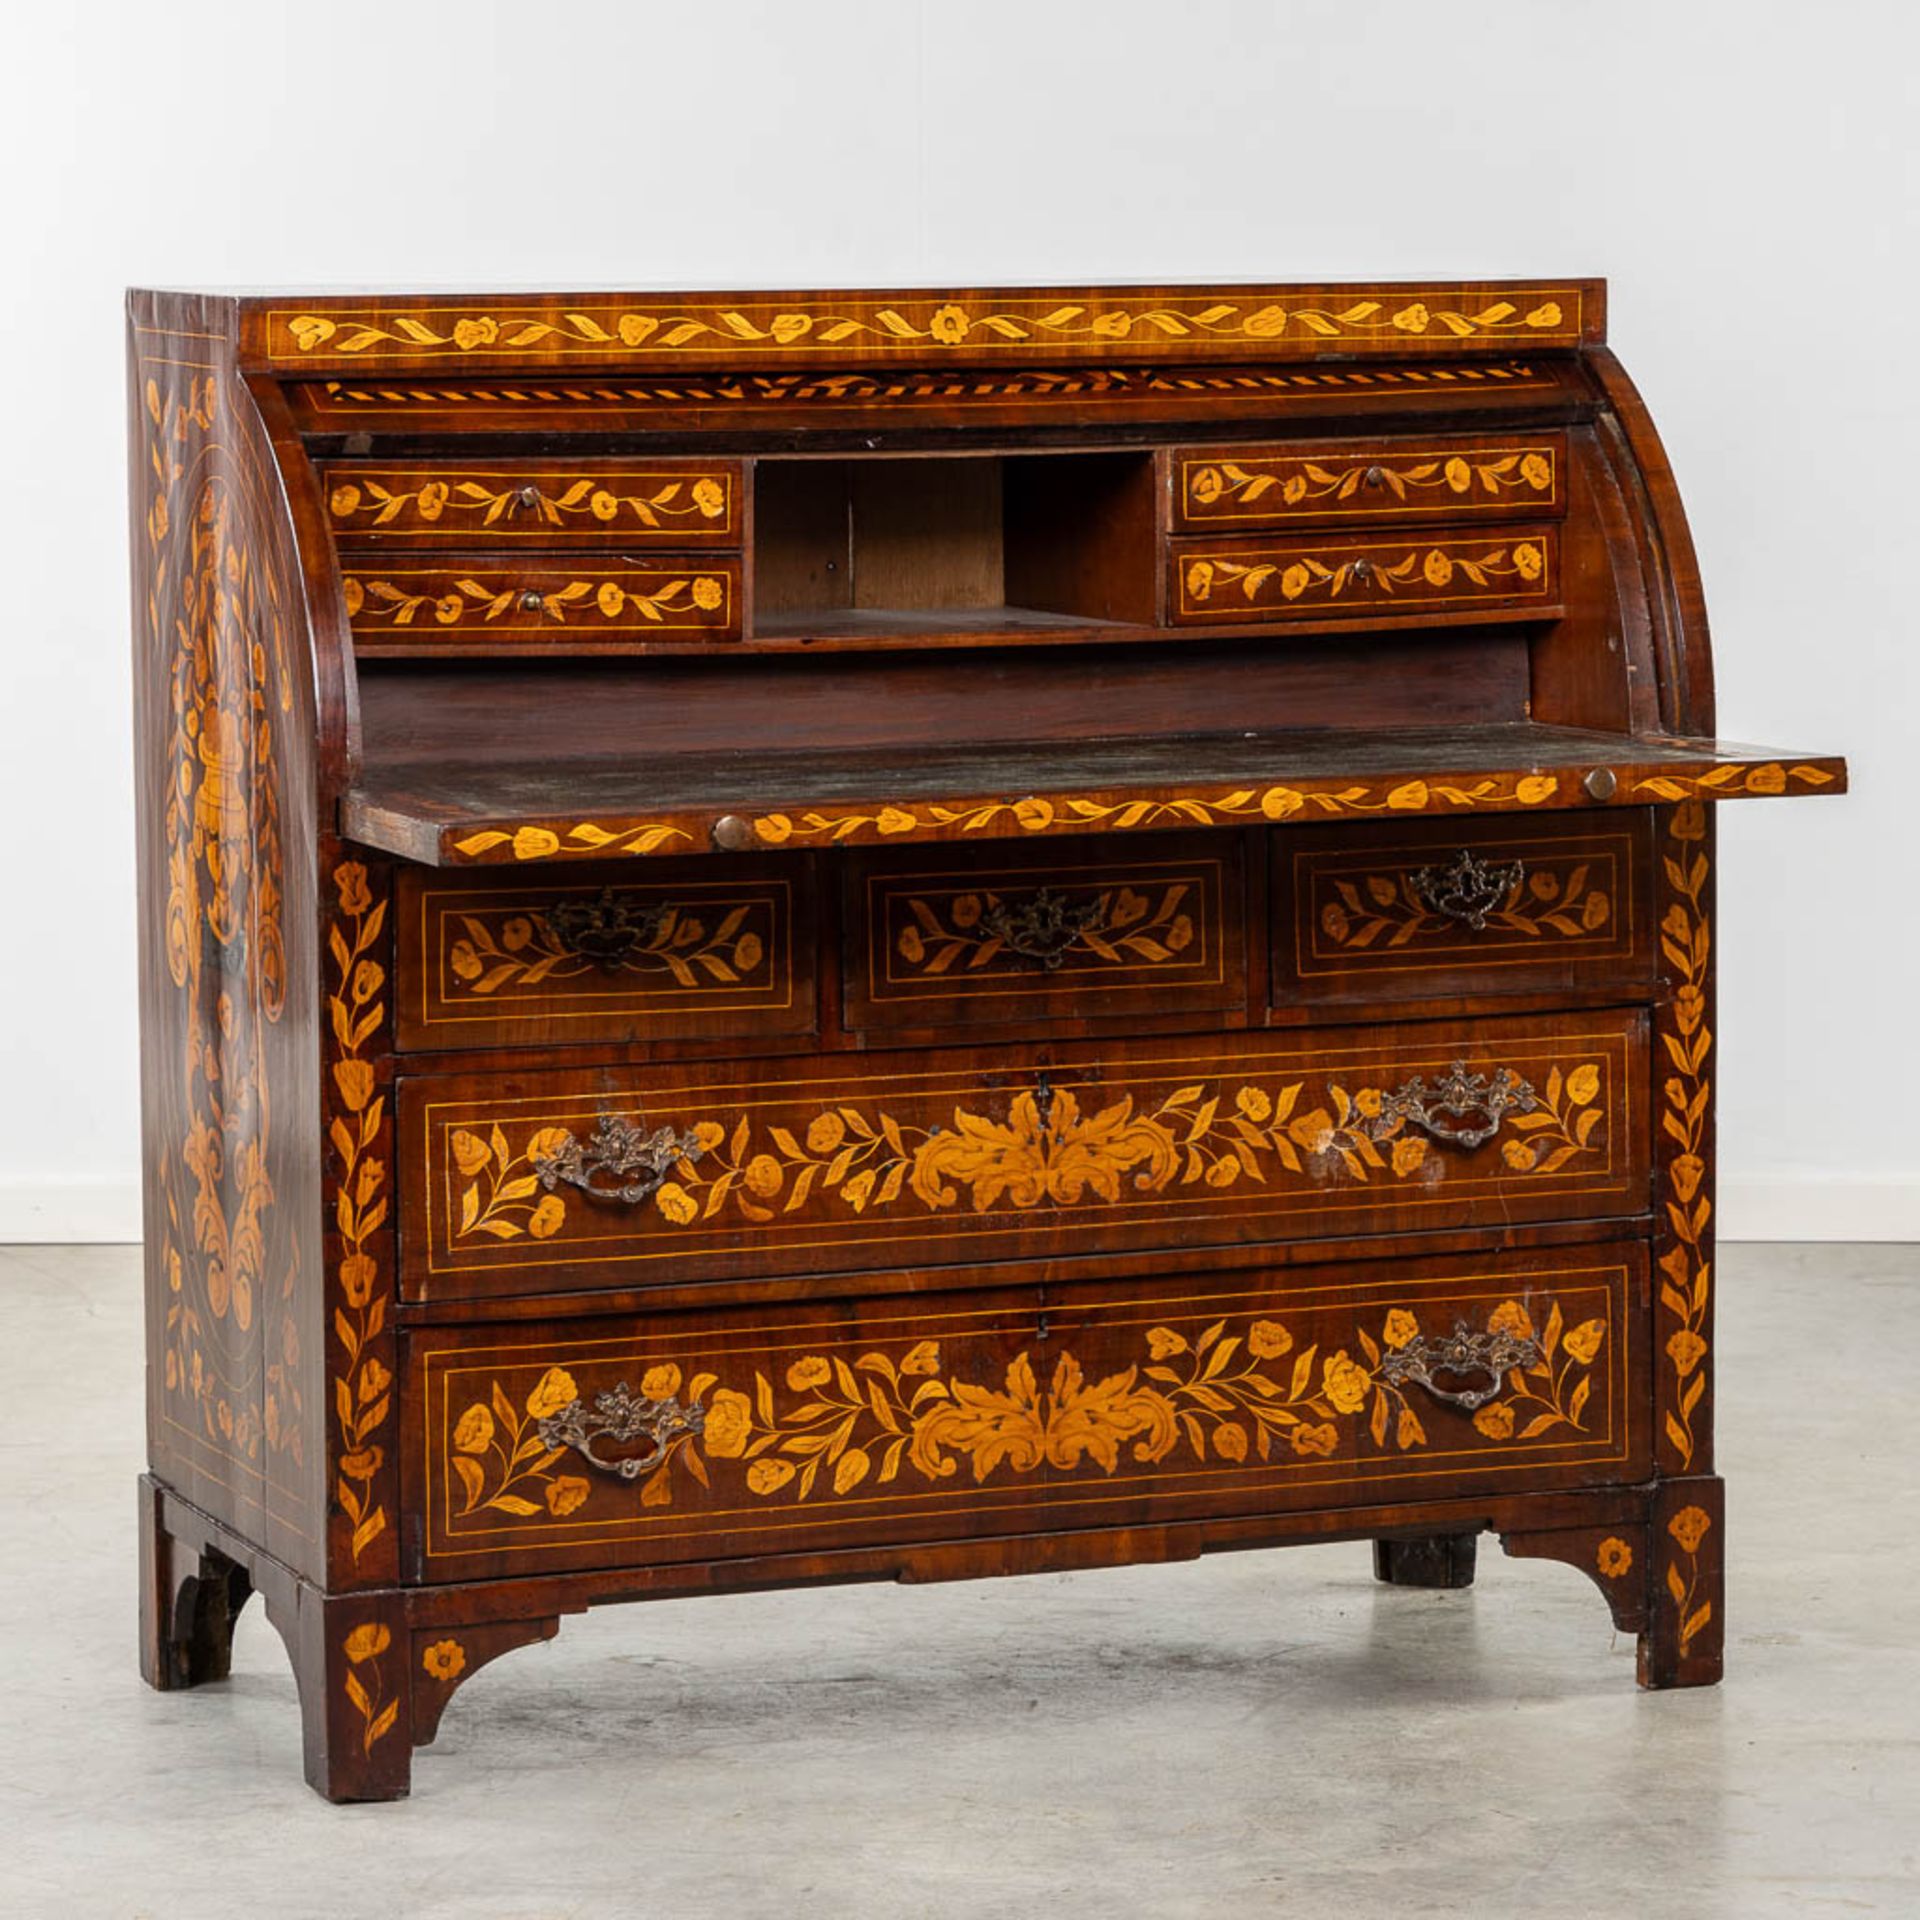 A fine marquetry inlay secretaire cabinet, The Netherlands, 18th C. (L:51 x W:112 x H:108 cm) - Image 3 of 20